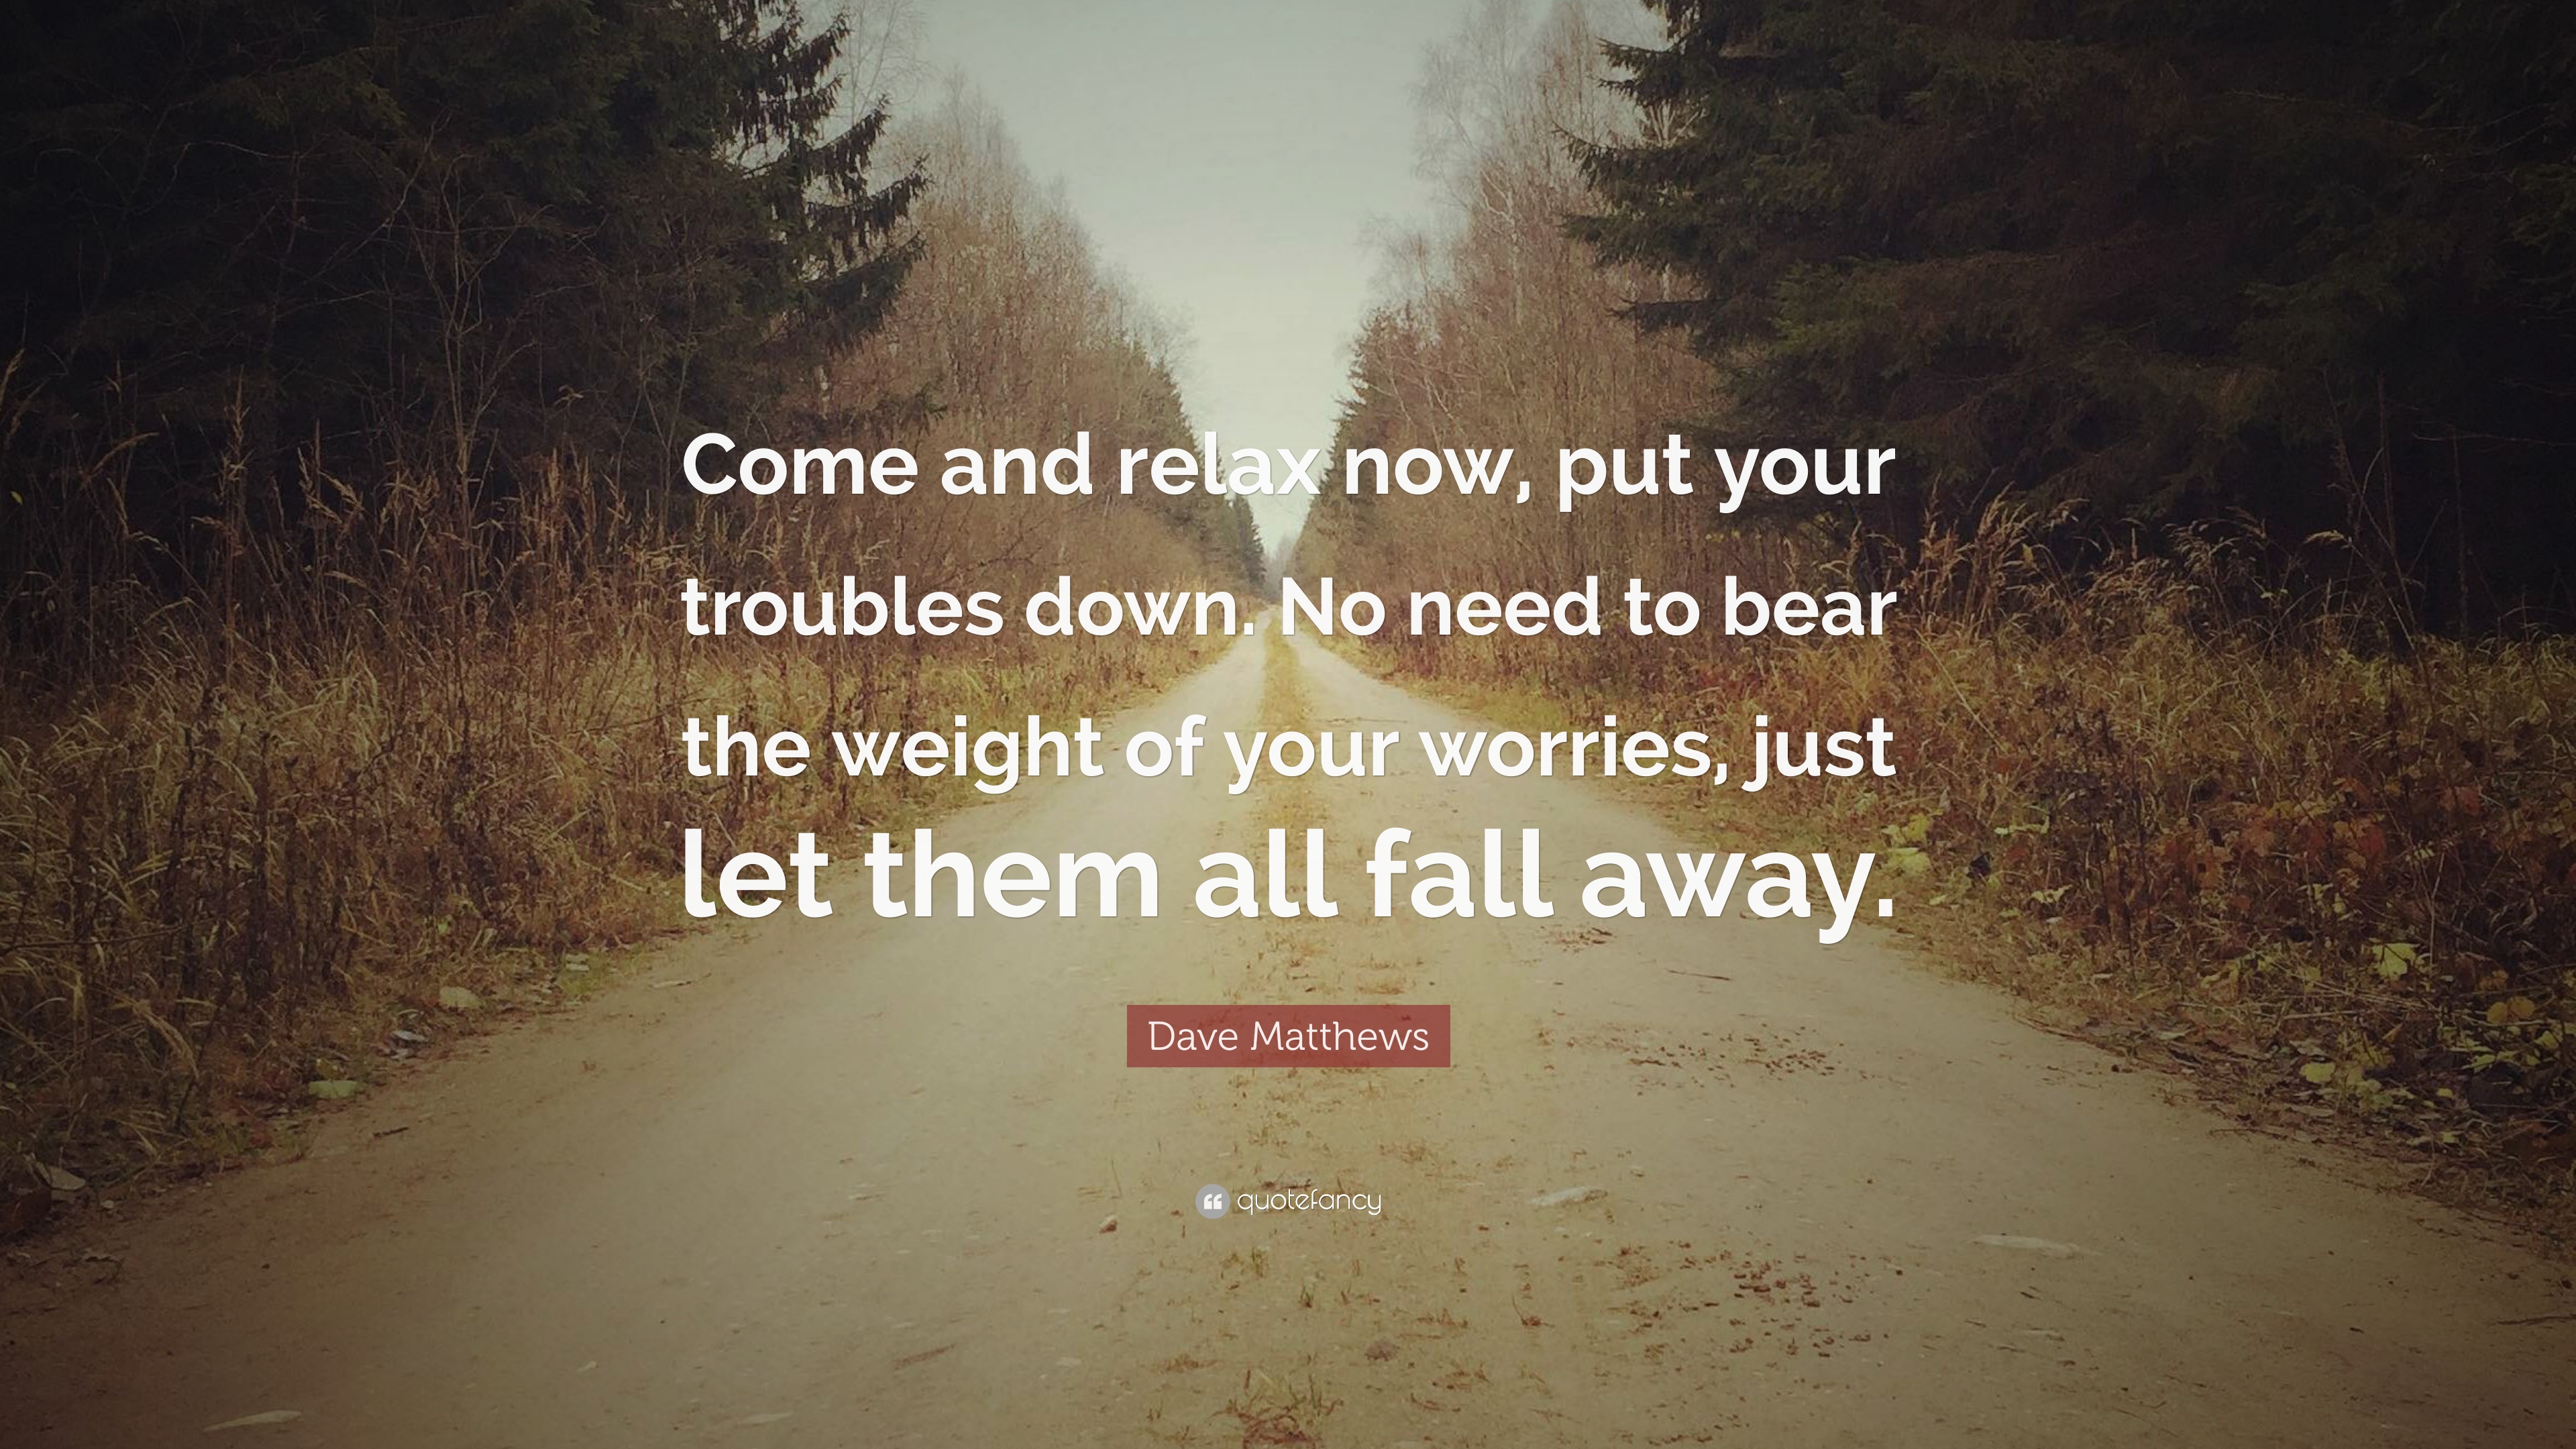 Dave Matthews Quote: “Come and relax now, put your troubles down. No ...